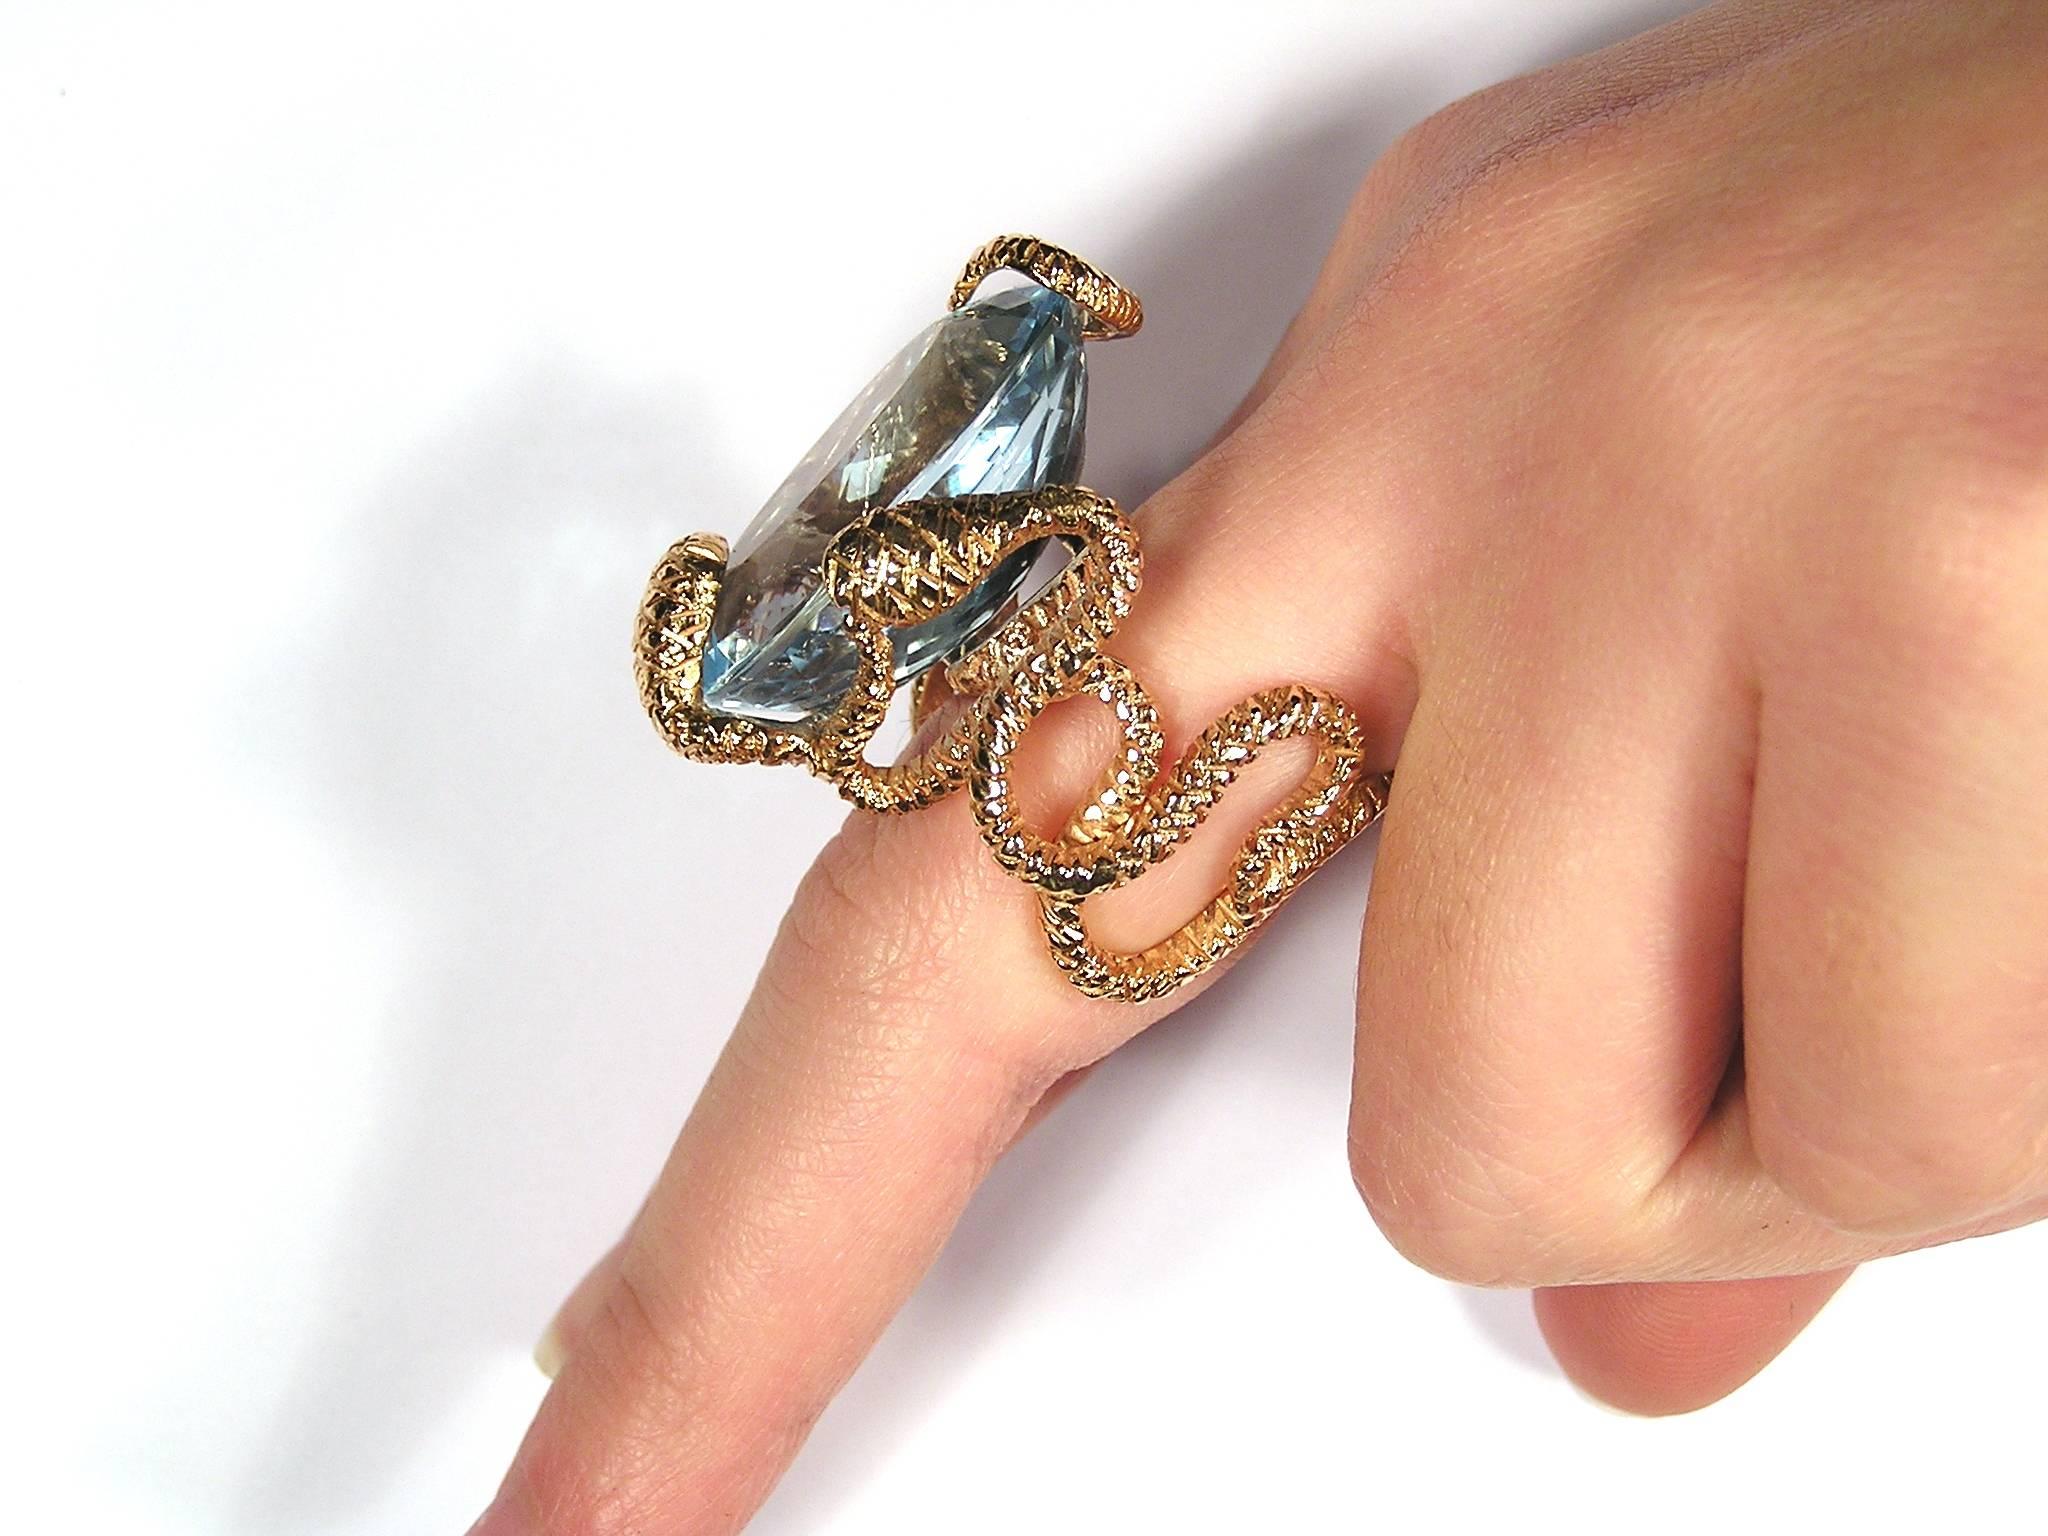 Modern snakes ring with natural blue topaz 48.20 ctw.
Topaz size is 27 x 19 millimeters / 1.06299 x 0.748031 inches.
Finger Size is 7.
This ring can be altered in size free of charg.
It  is stamped with the Italian Mark 750 - 716MI
Ready for